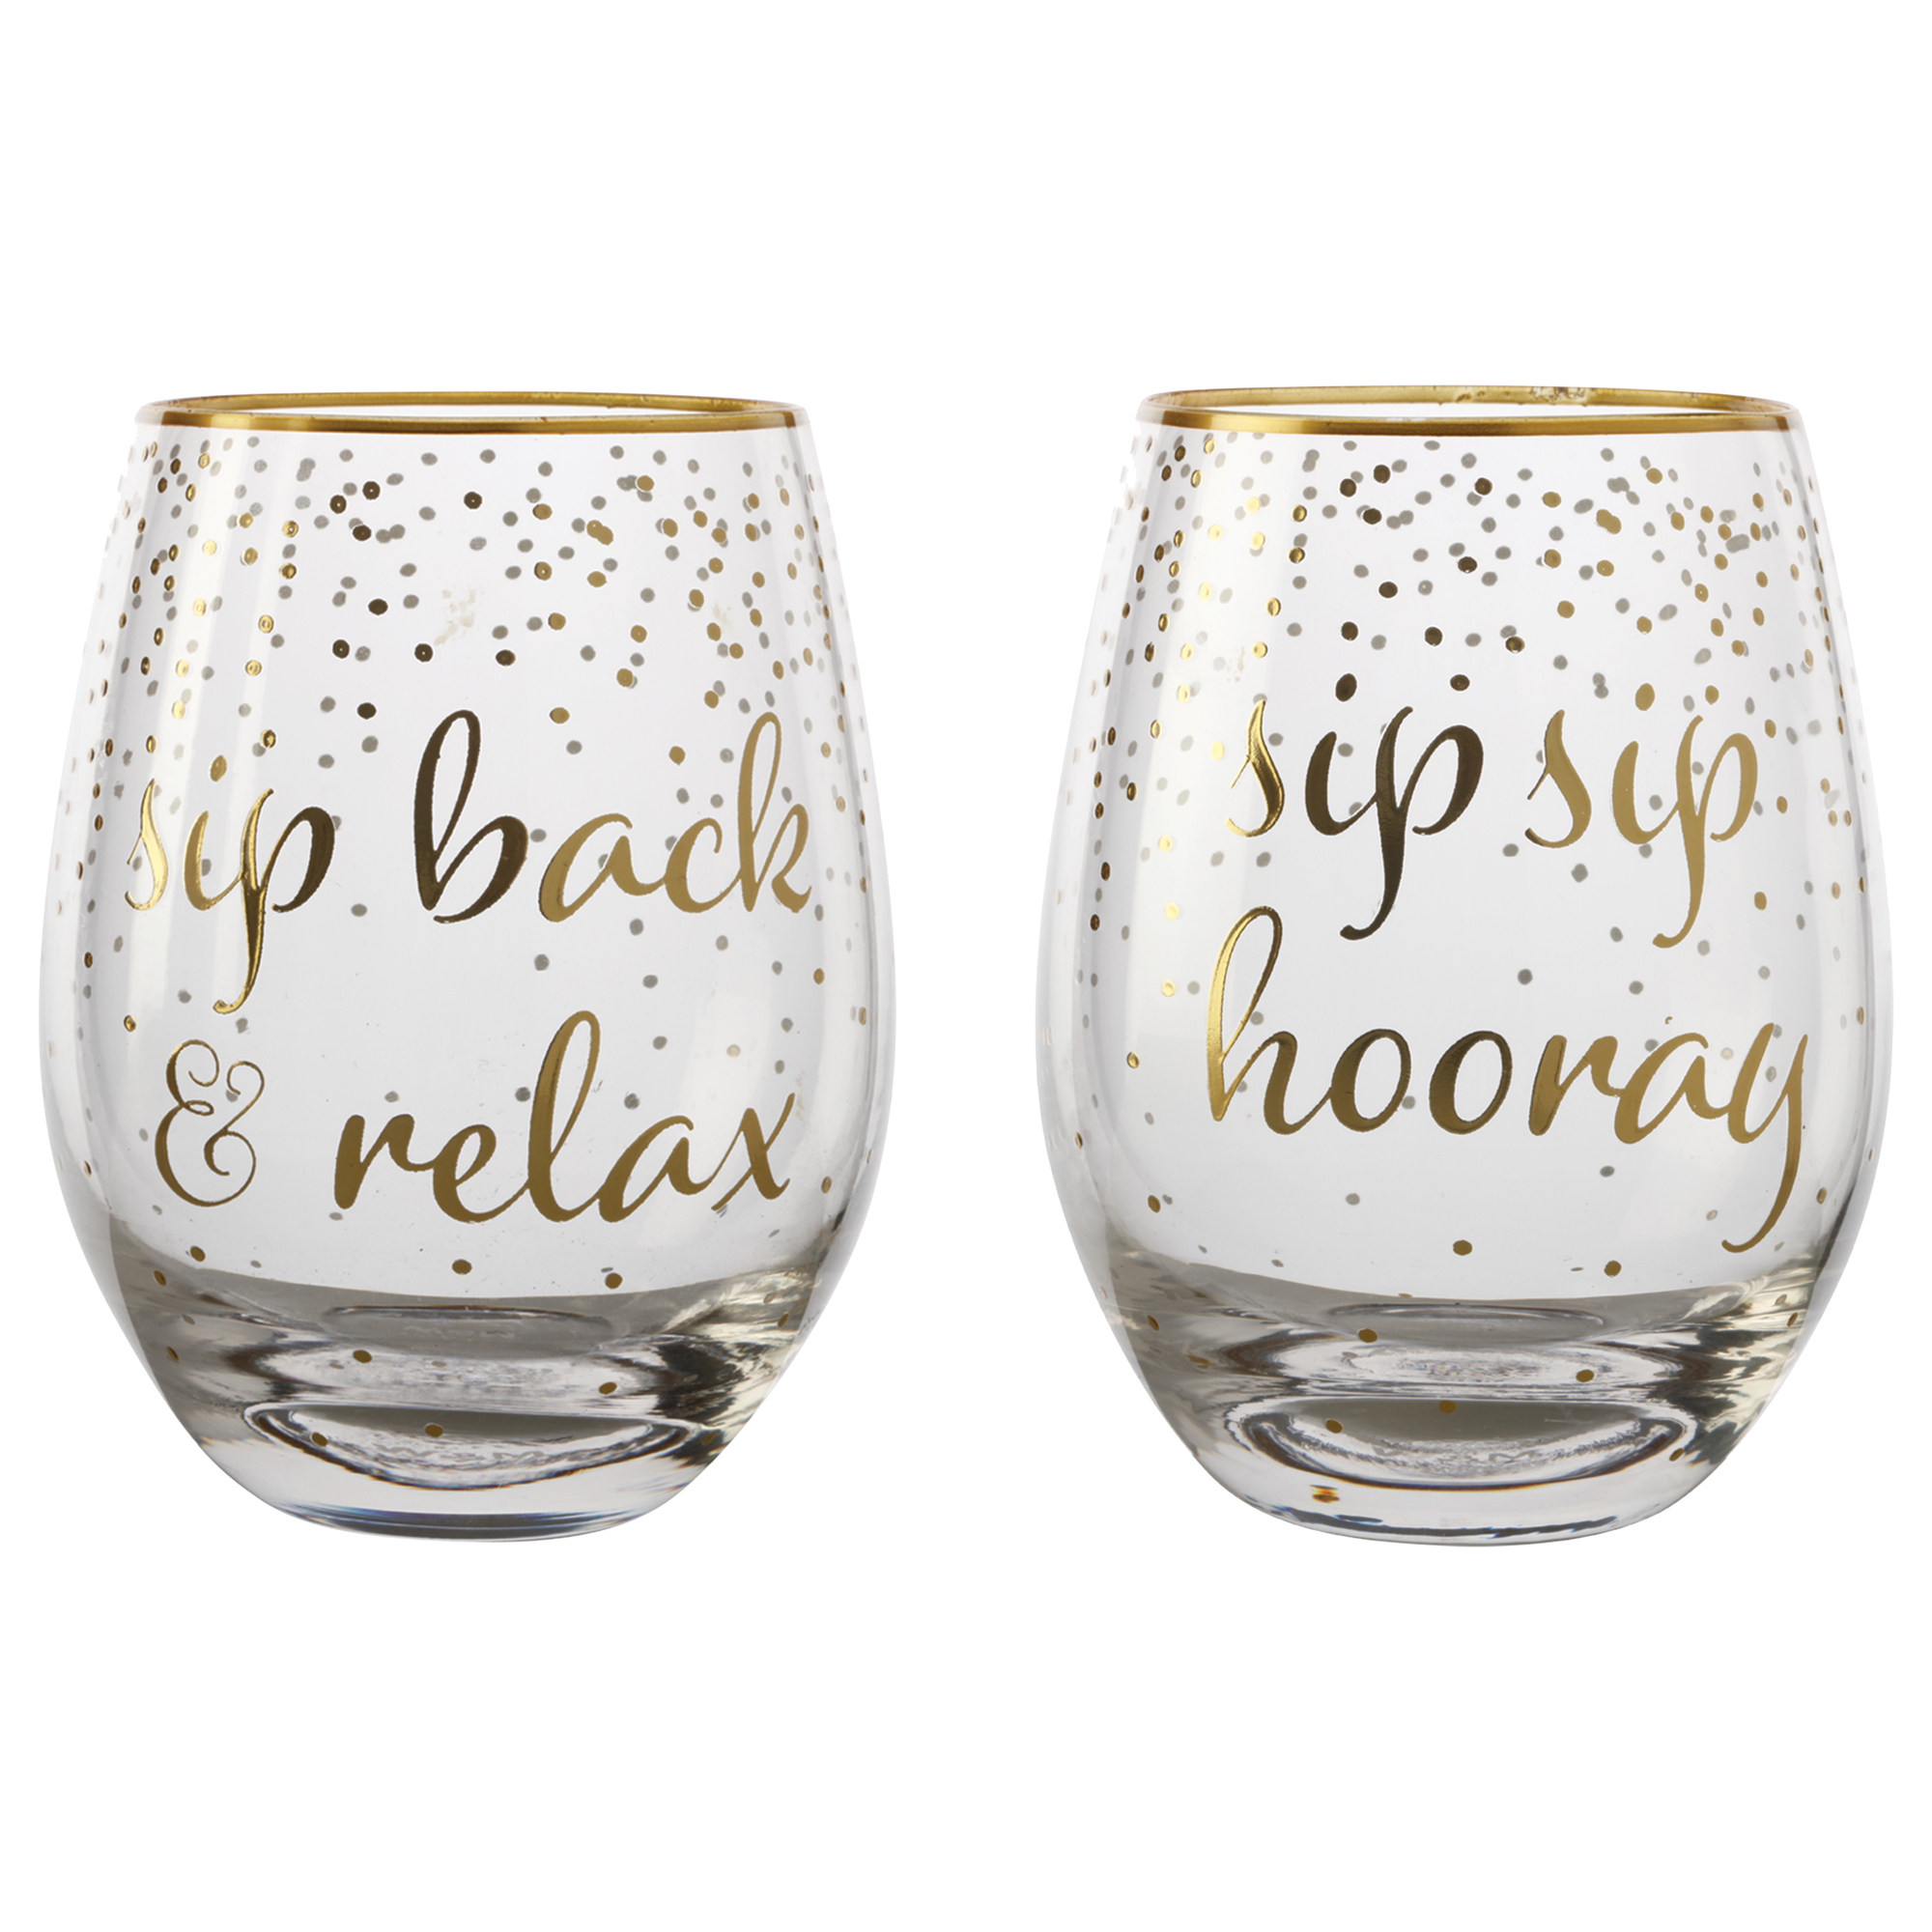 Gifts for Mother's Day | Hilarious Wine Glass | Beanstalk Mums